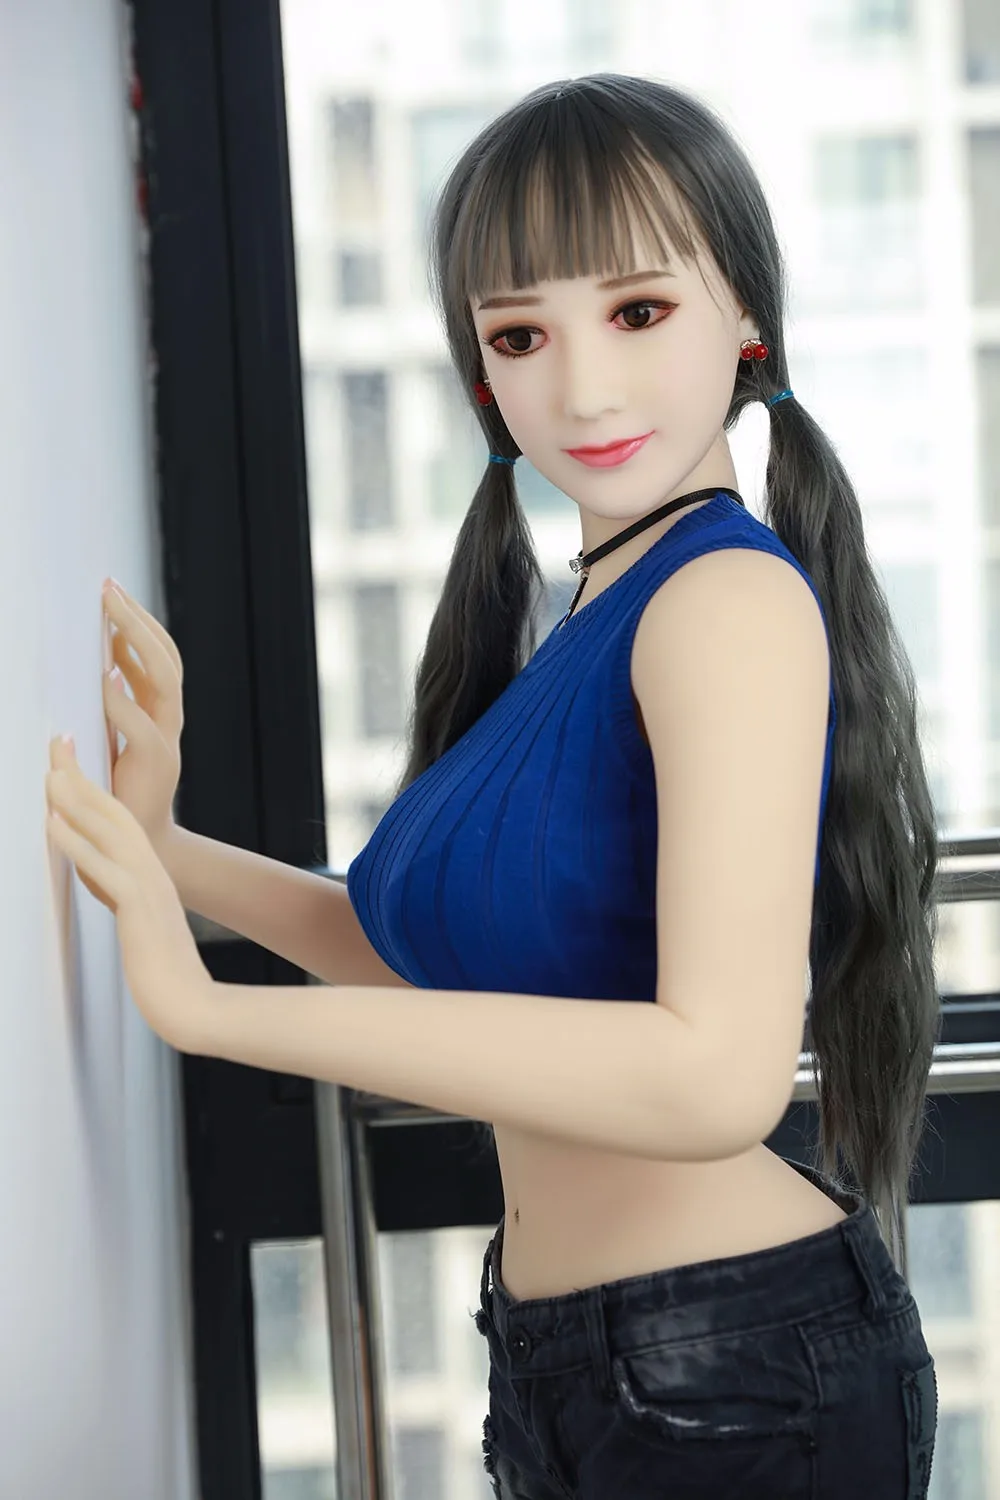 Qcldoll Adult Sex Toy Silicone Dolls Sexplay Doll For Men Big Ass Sex